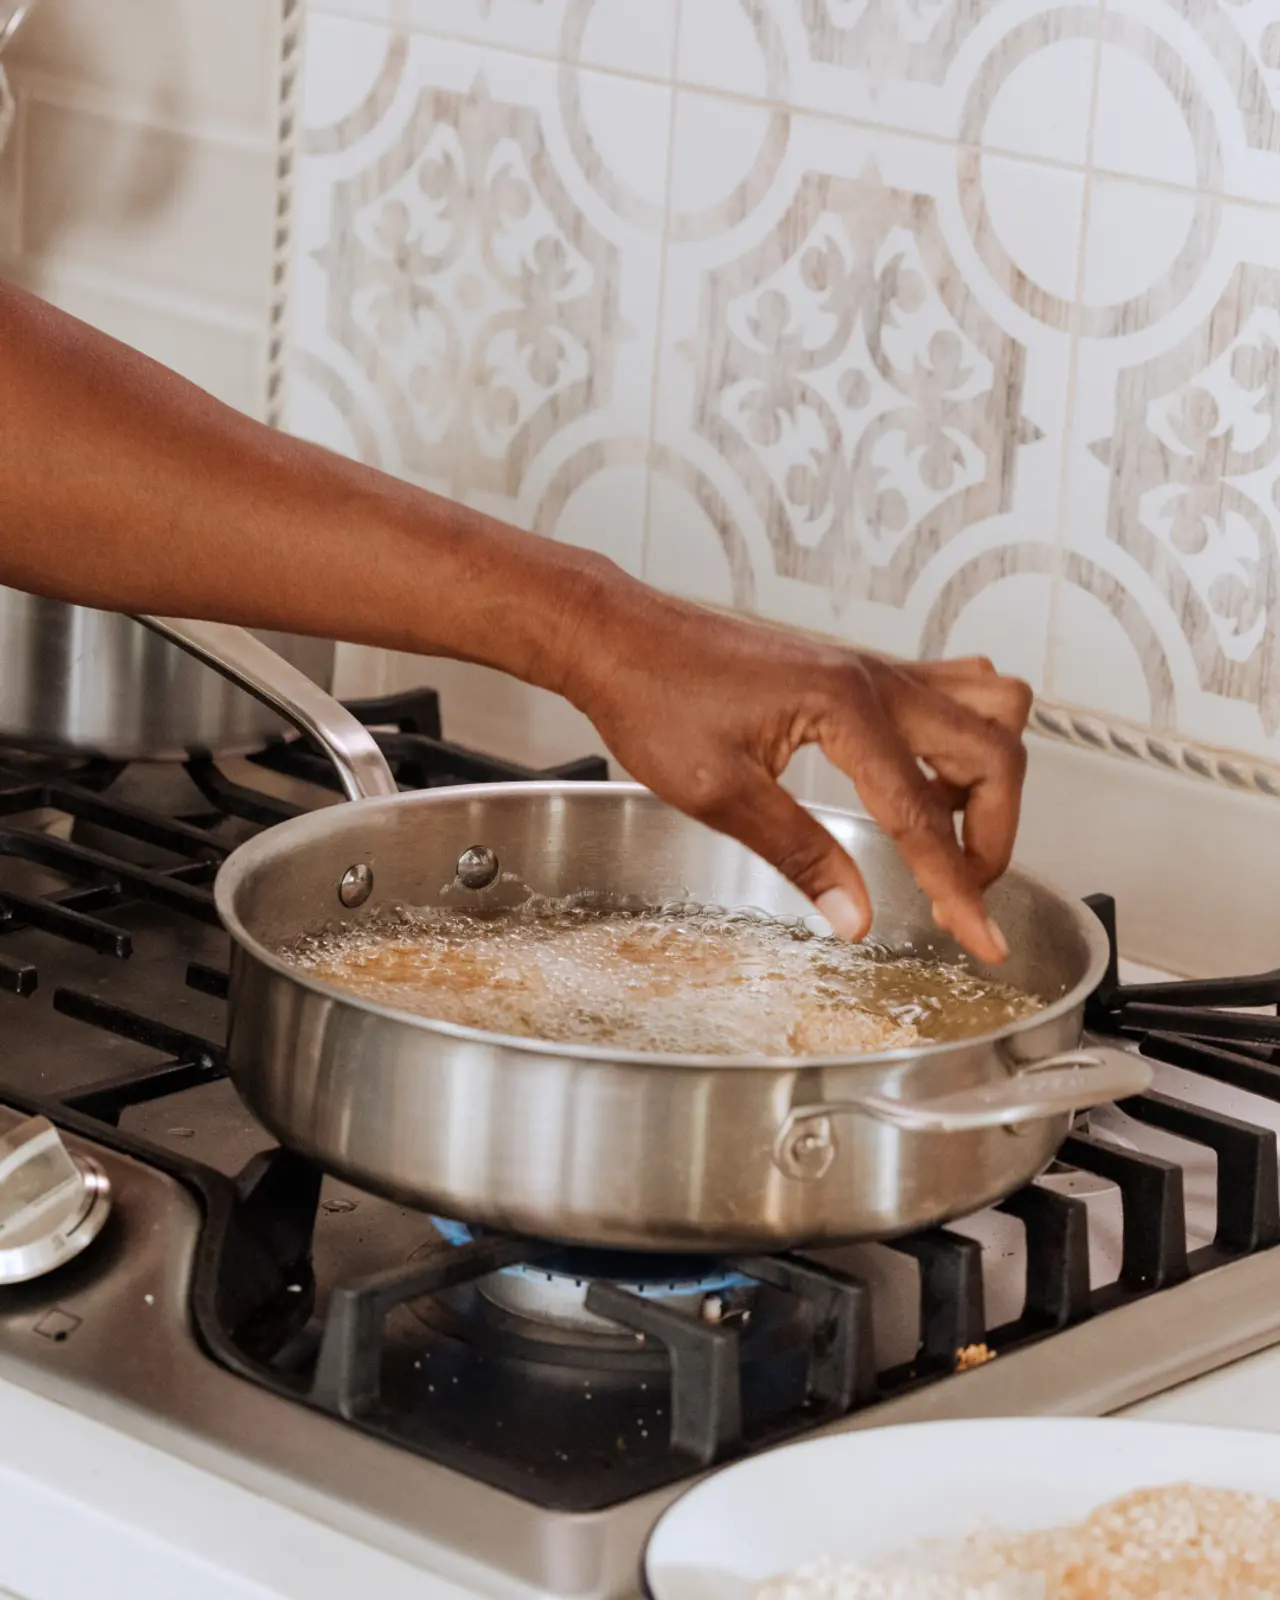 A person's hands are seen frying food in a stainless steel pan on a gas stove.